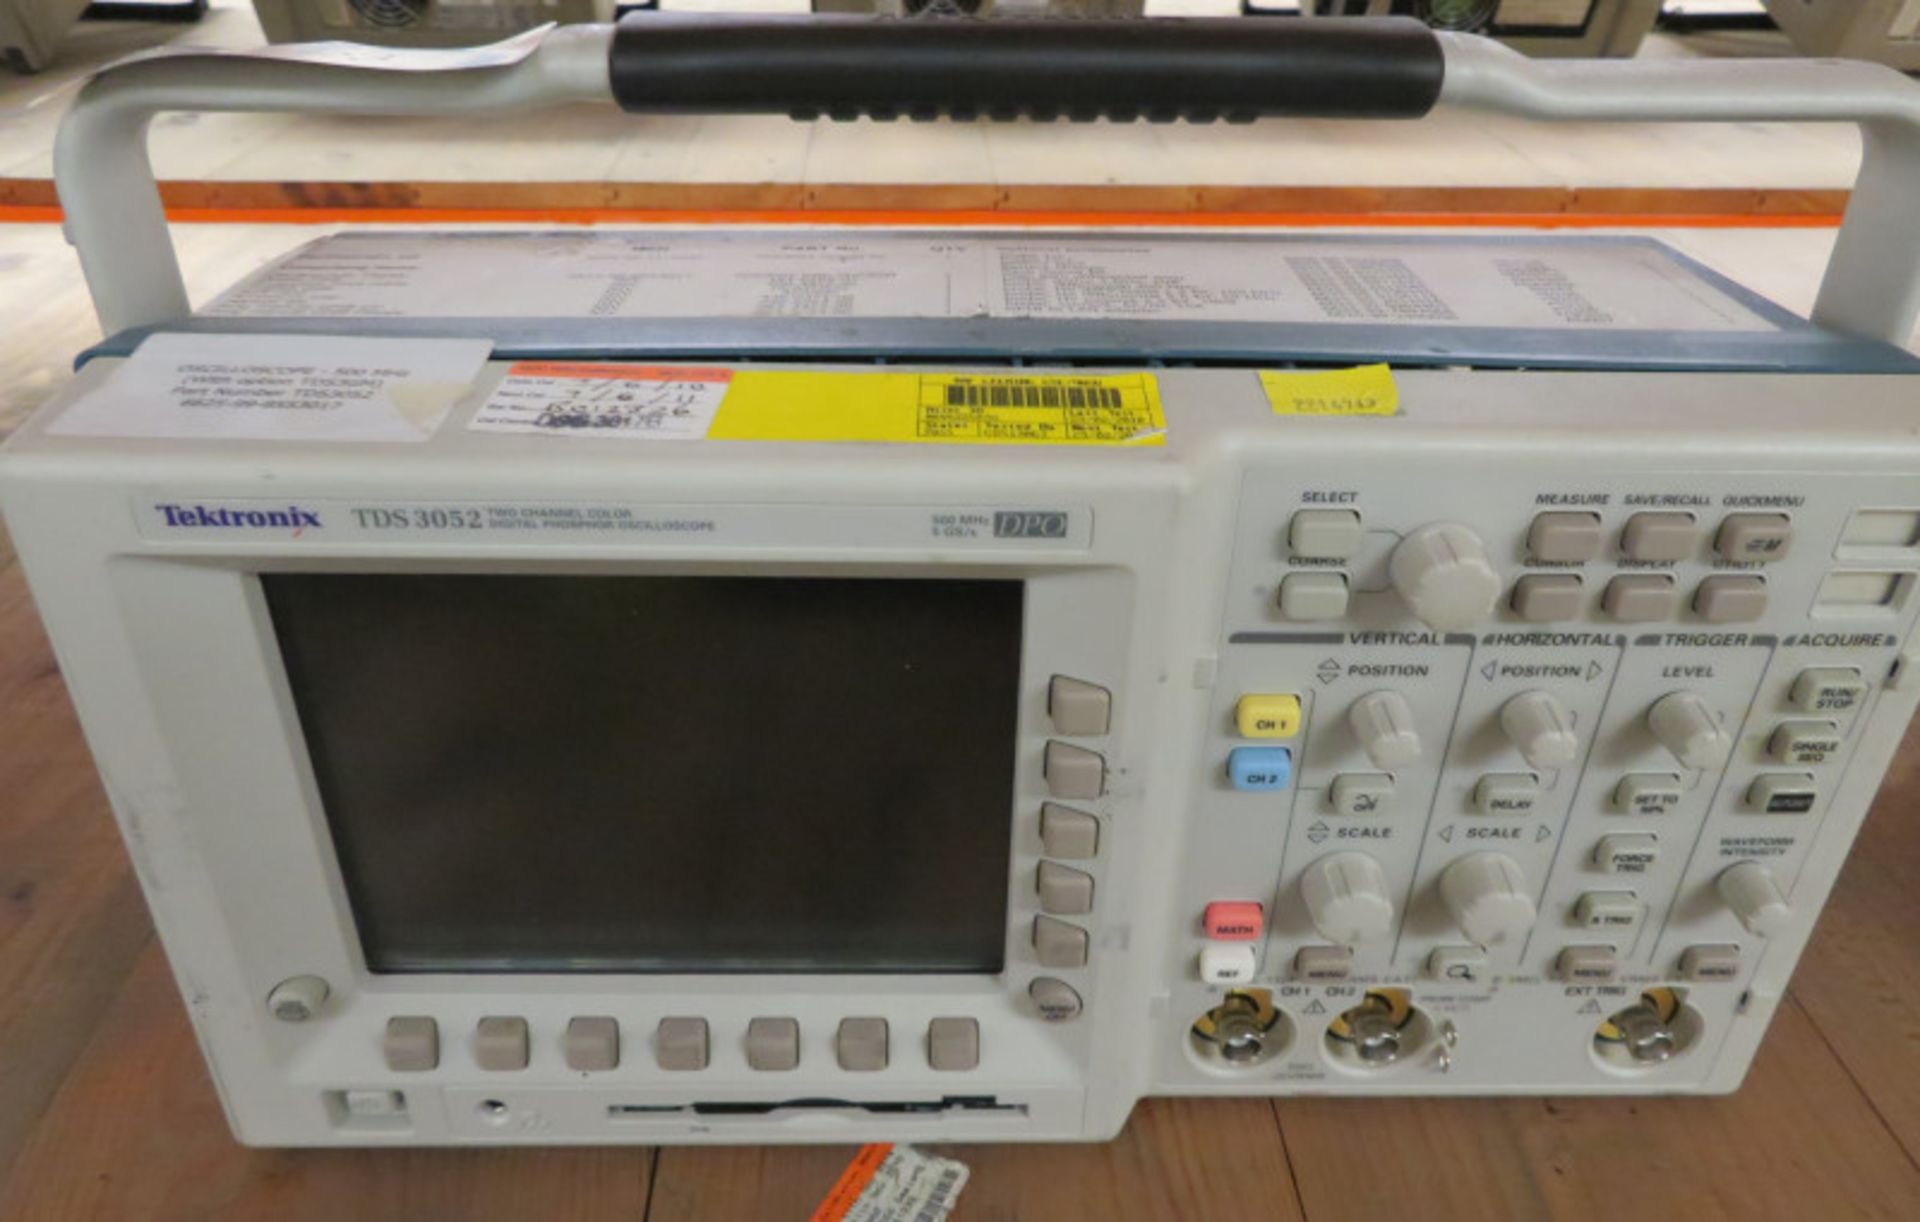 Tektronix TDS 3052 Two Channel Color Digital Phosphor Oscilloscope- 500MHz - 5GS/s